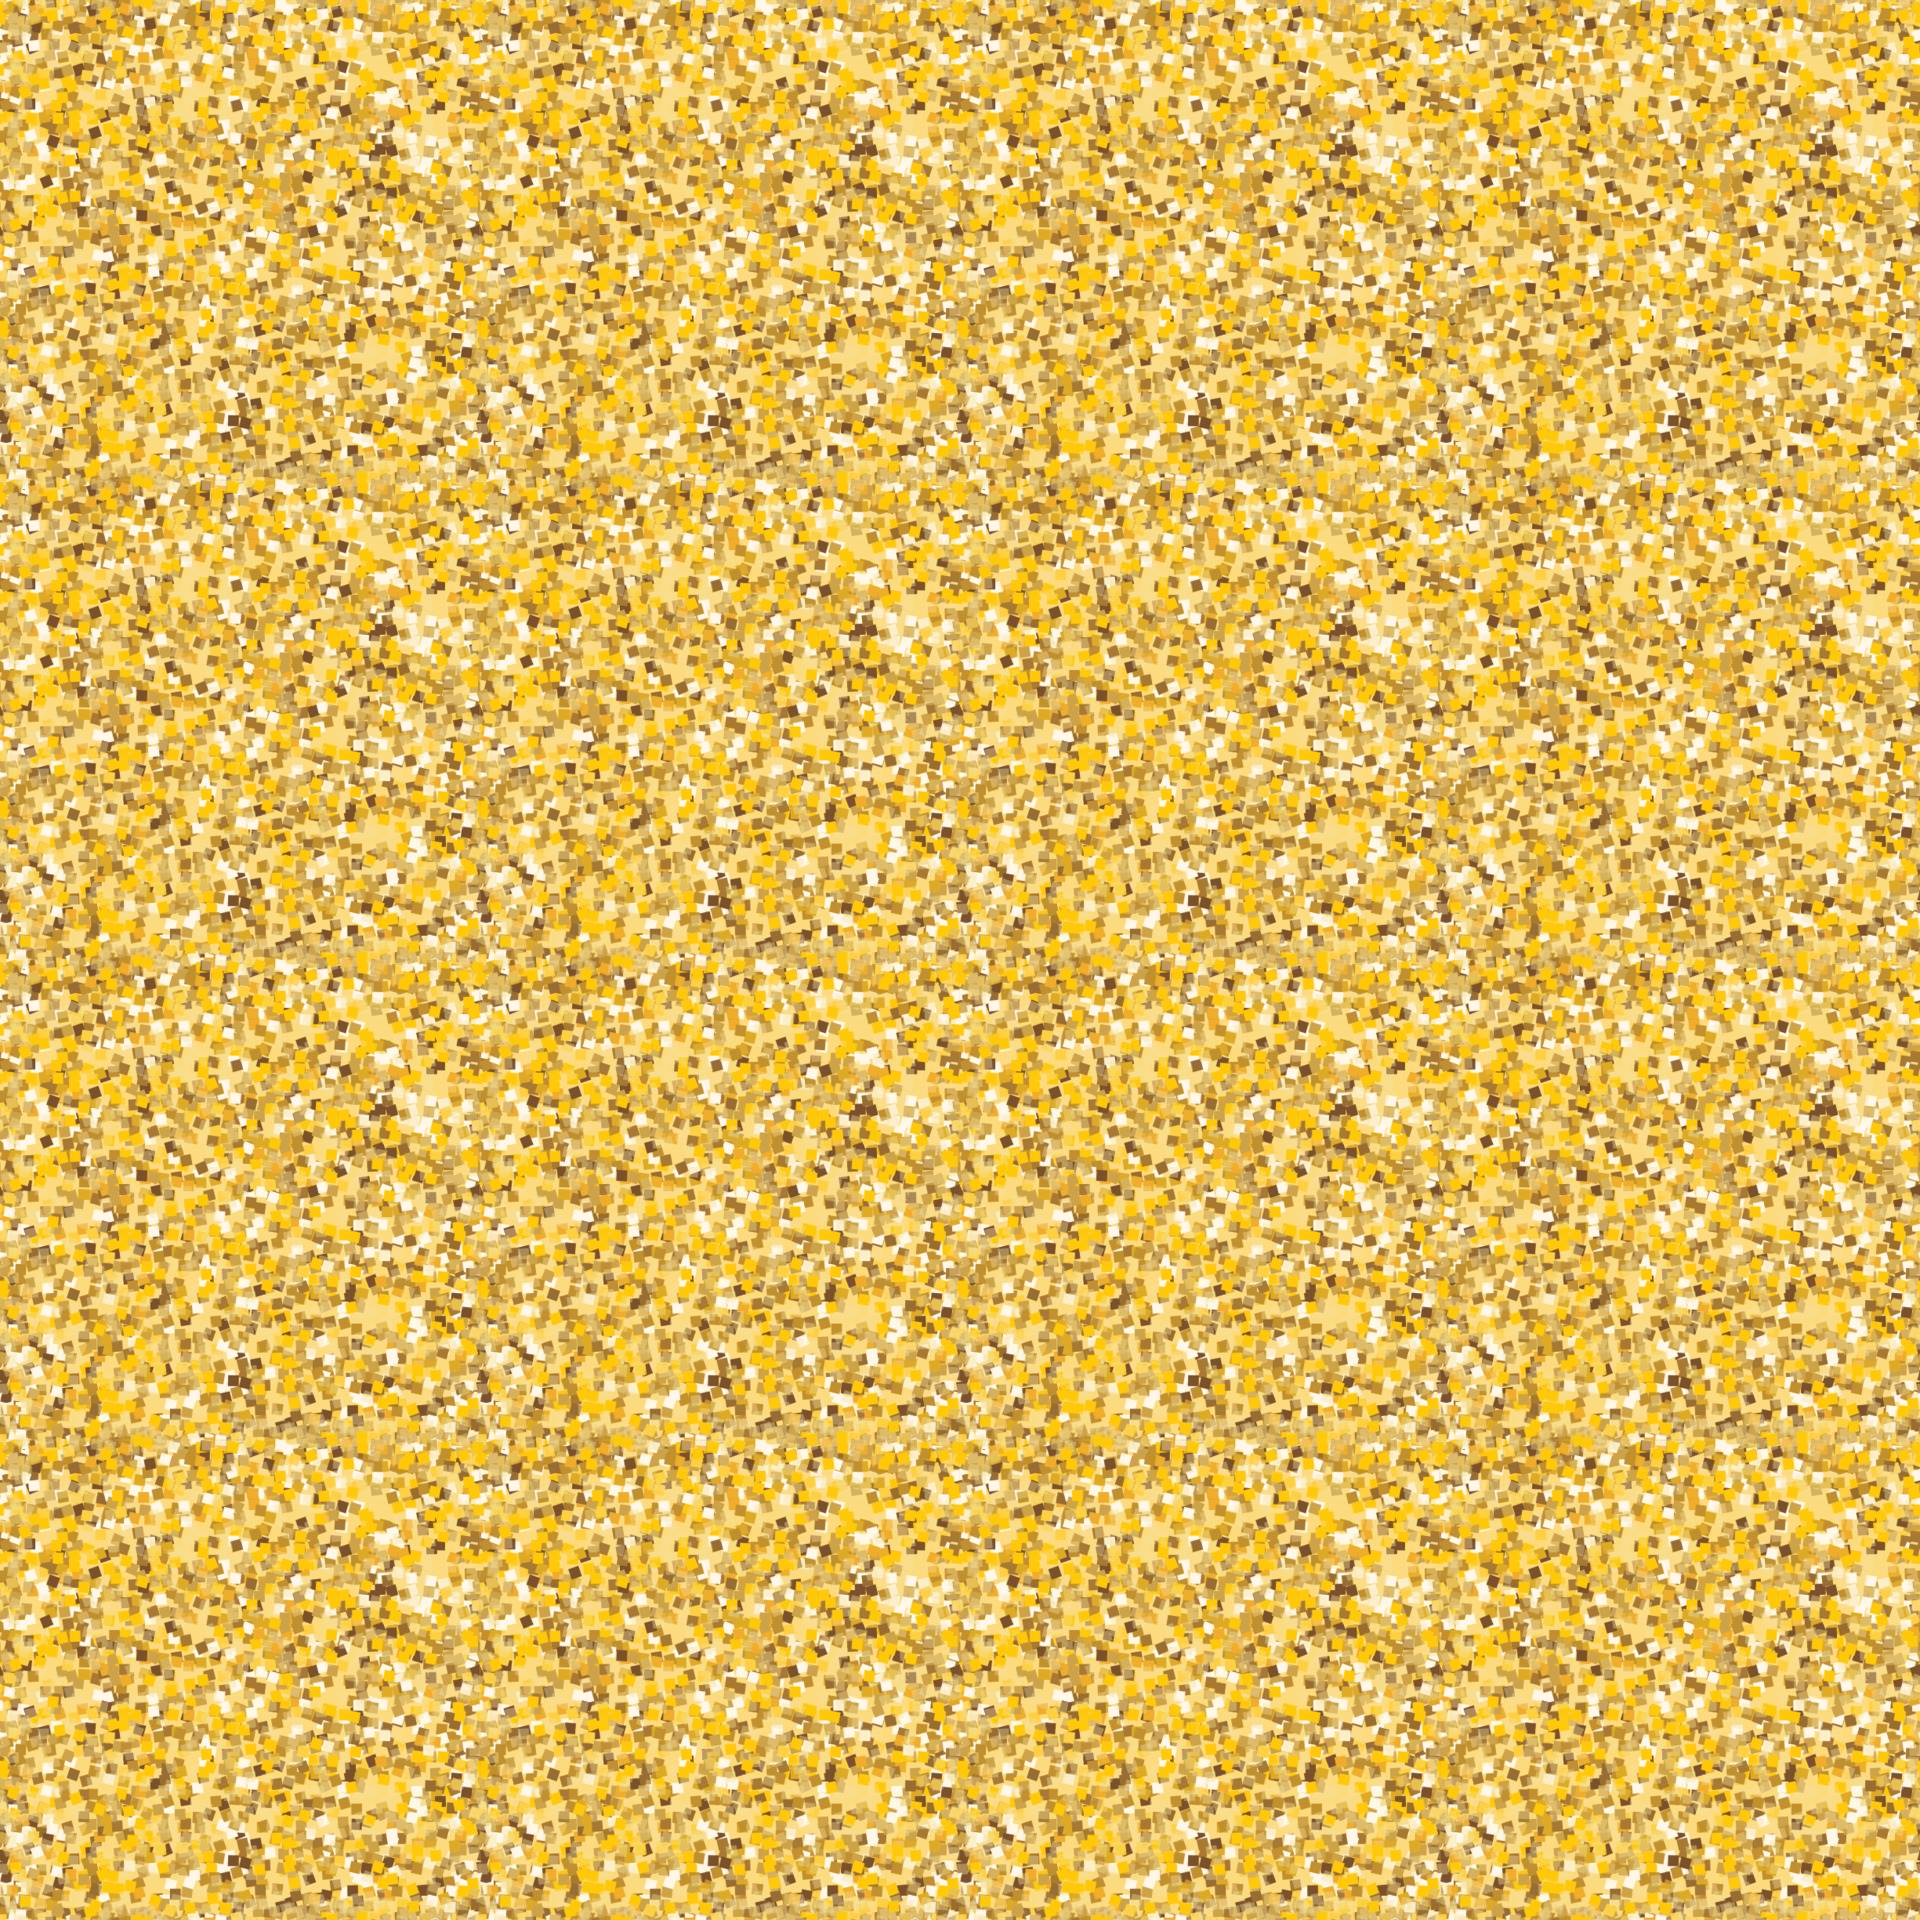 https://static.vecteezy.com/system/resources/previews/003/359/689/original/golden-shiny-glossy-texture-repeat-structure-seamless-pattern-free-vector.jpg